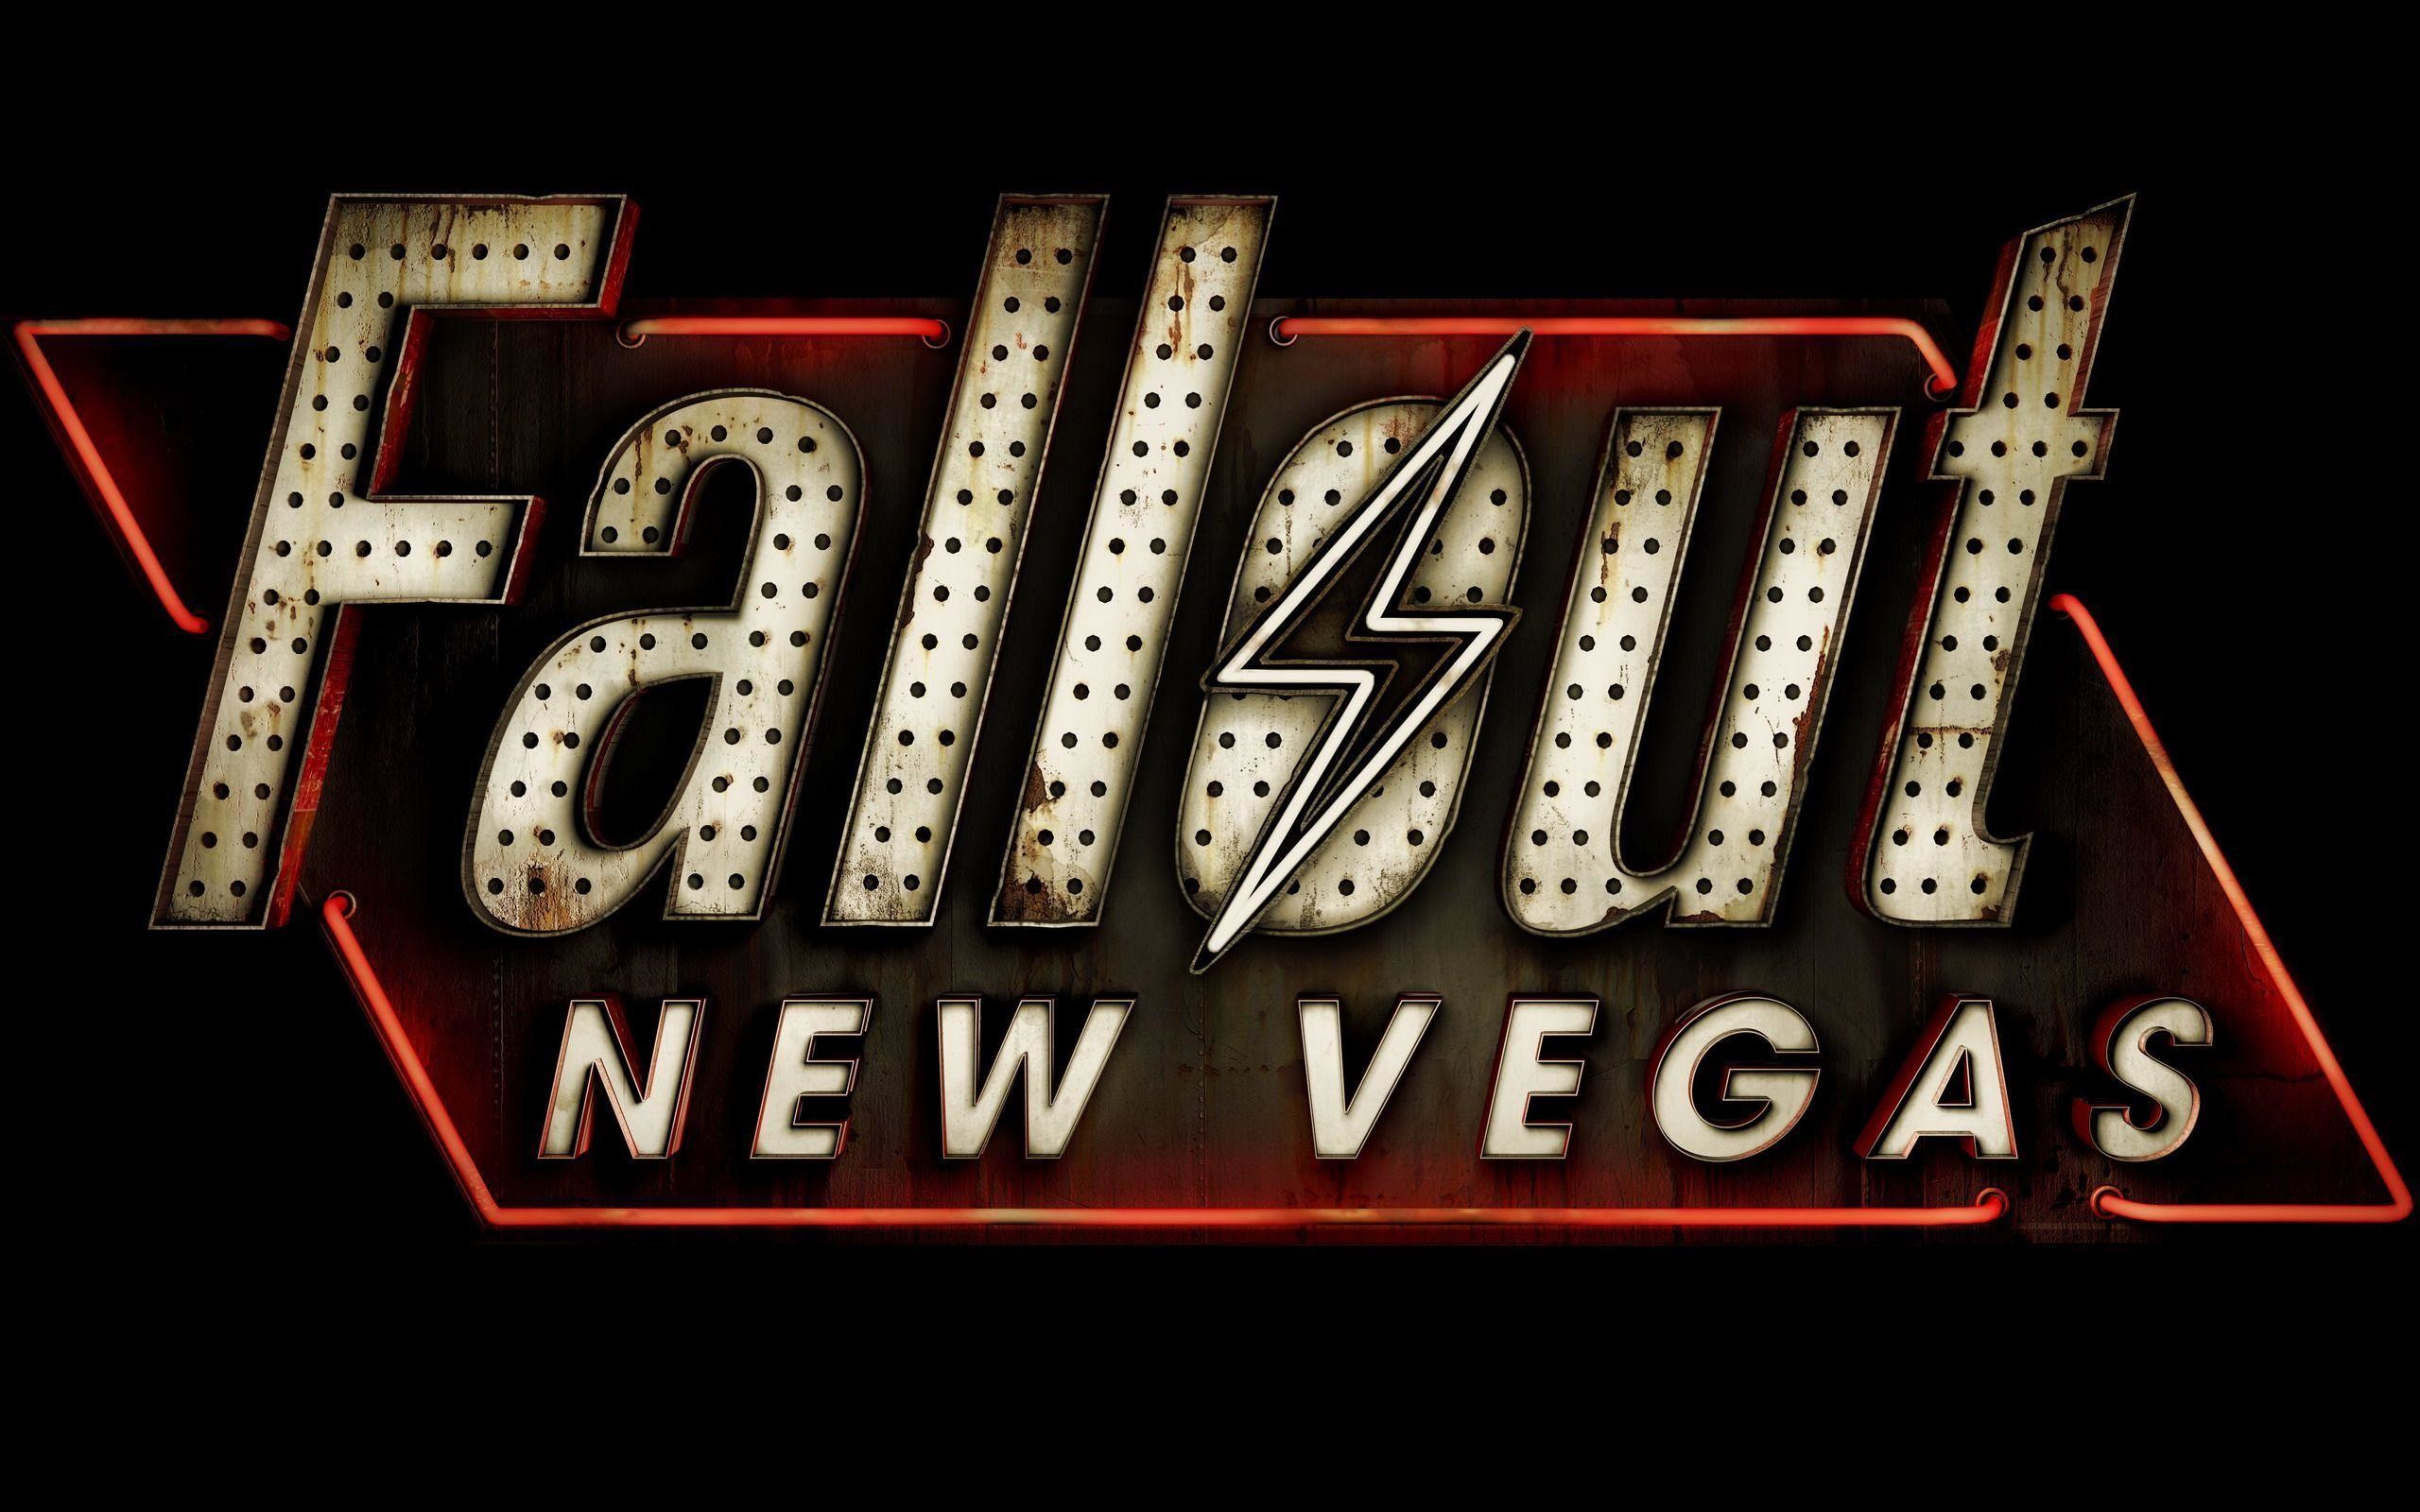 2560x1600 FALLOUT NEW VEGAS RPG HD WALLPAPER ,BACKGROUNDS,HD,IMAGES,SEARCH .